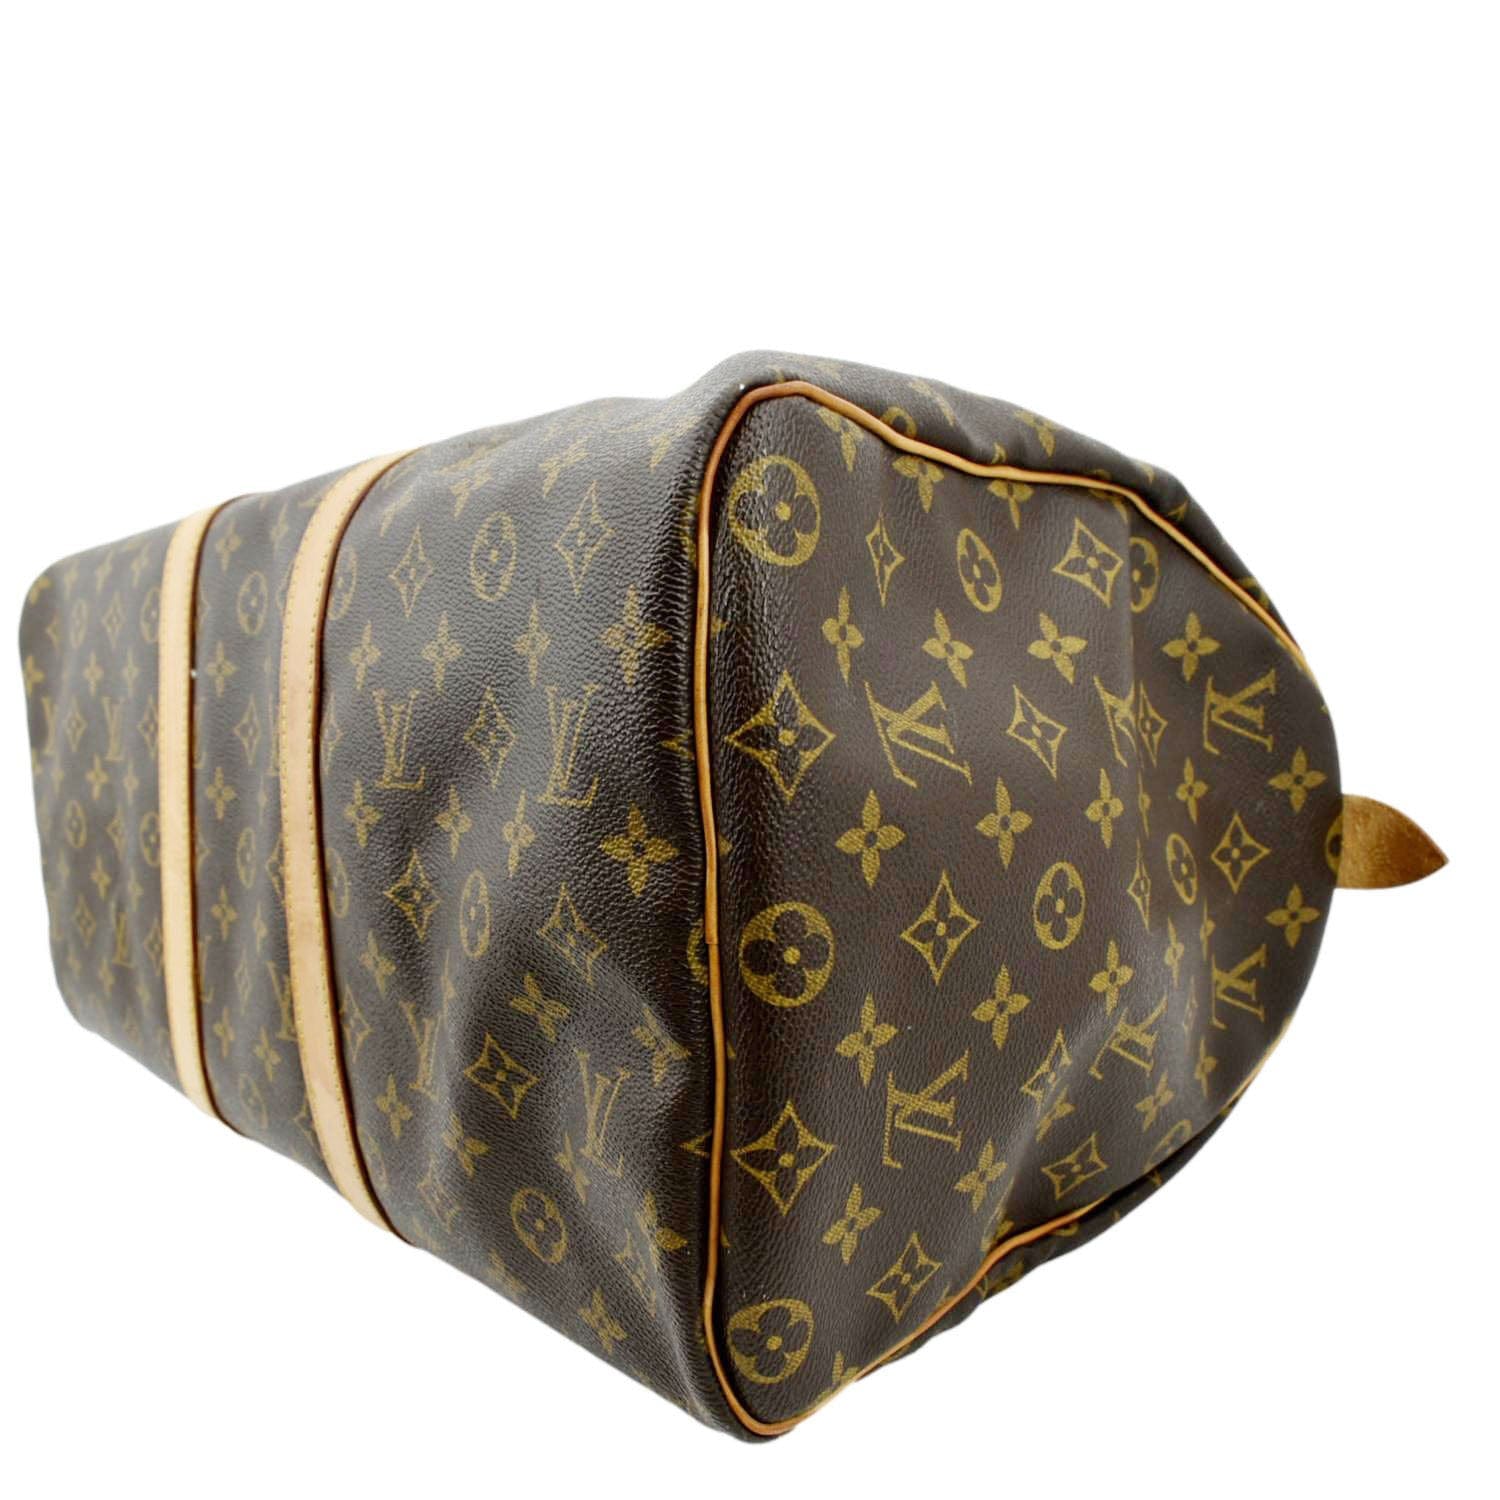 Louis Vuitton Monogram Keepall 45 - Brown Luggage and Travel